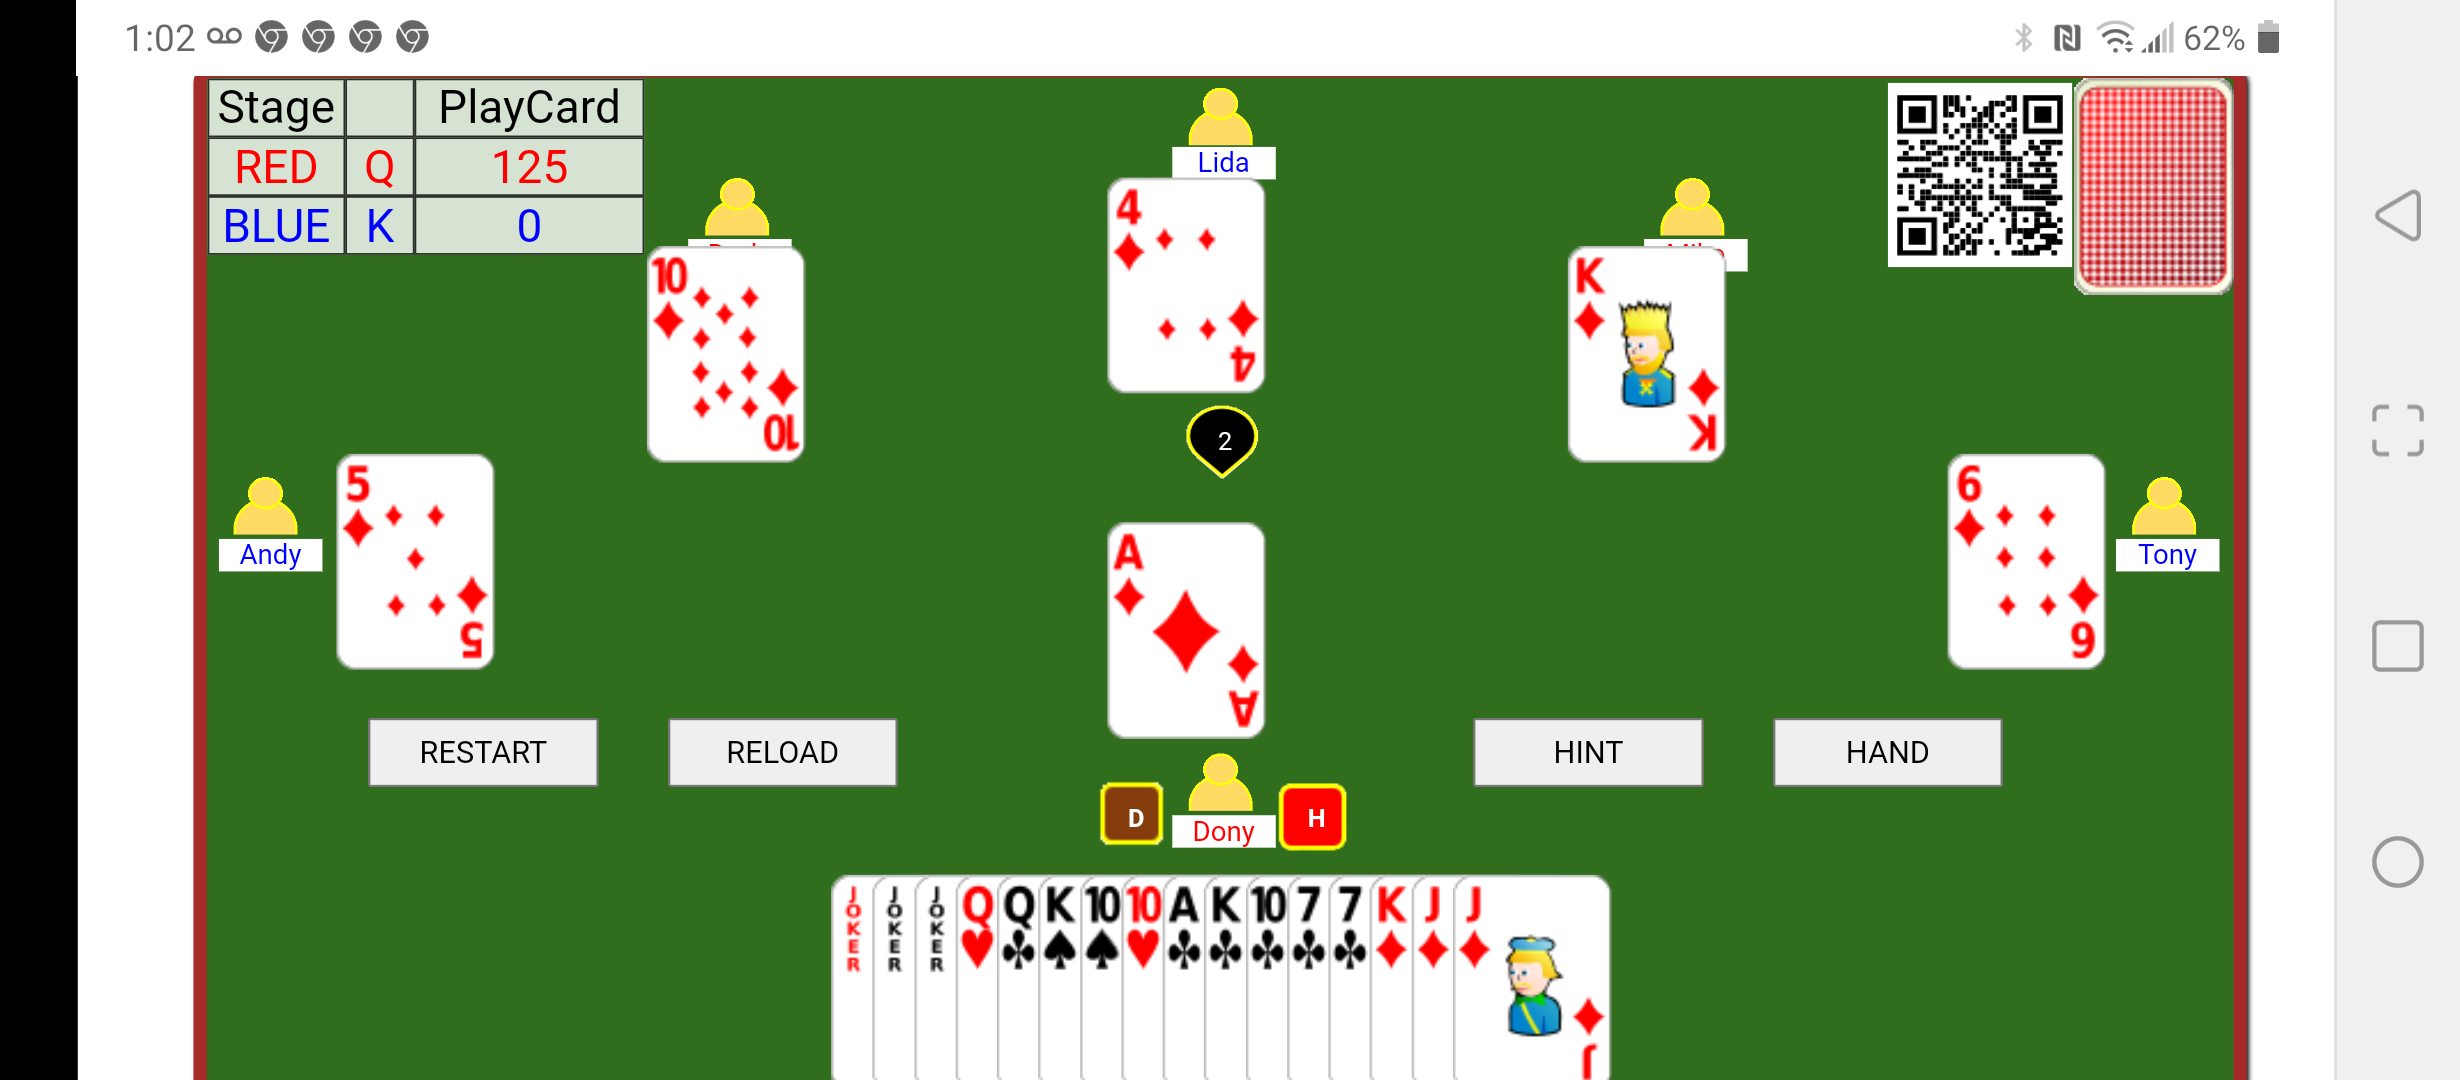 html5 tractor card game Screenshot_20220126-010236.png